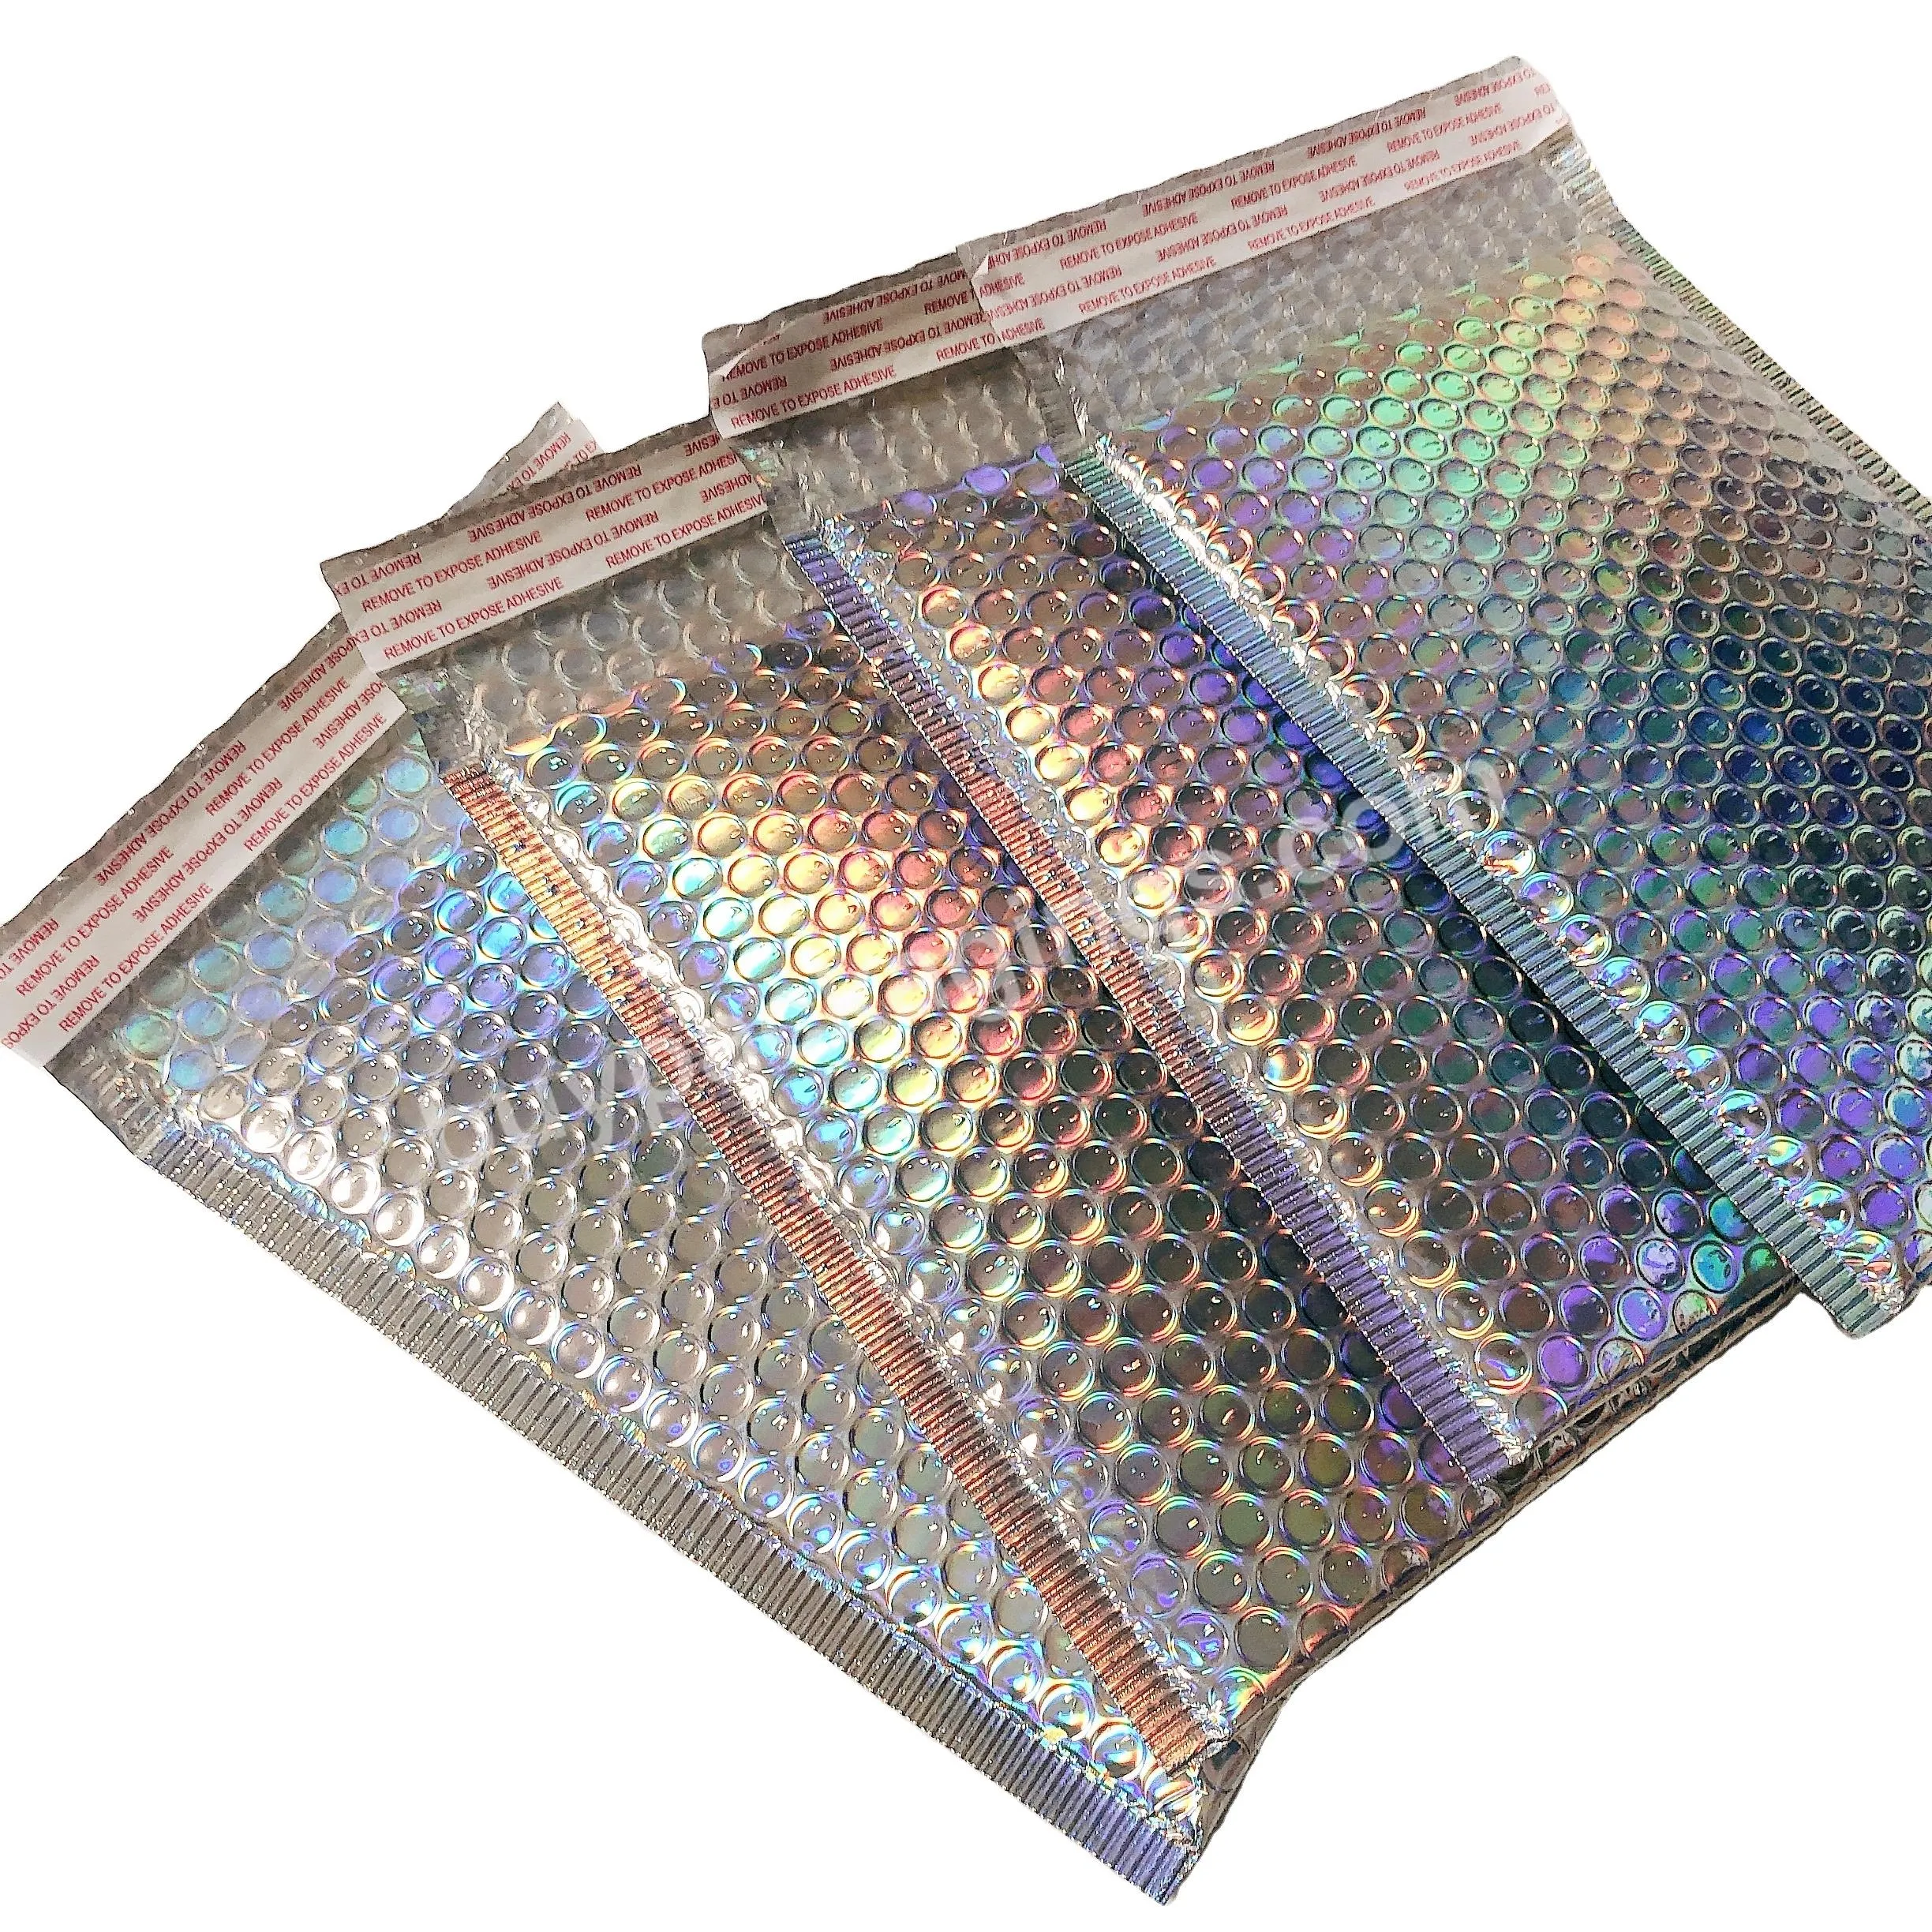 Customized Logo Packaging Bubble Envelope Holographic Bubble Mailers Self Seal Padded Envelopes Bags - Buy Holographic Bubble Mailers,Customised Logo Packaging,Bubble Envelope Holographic.